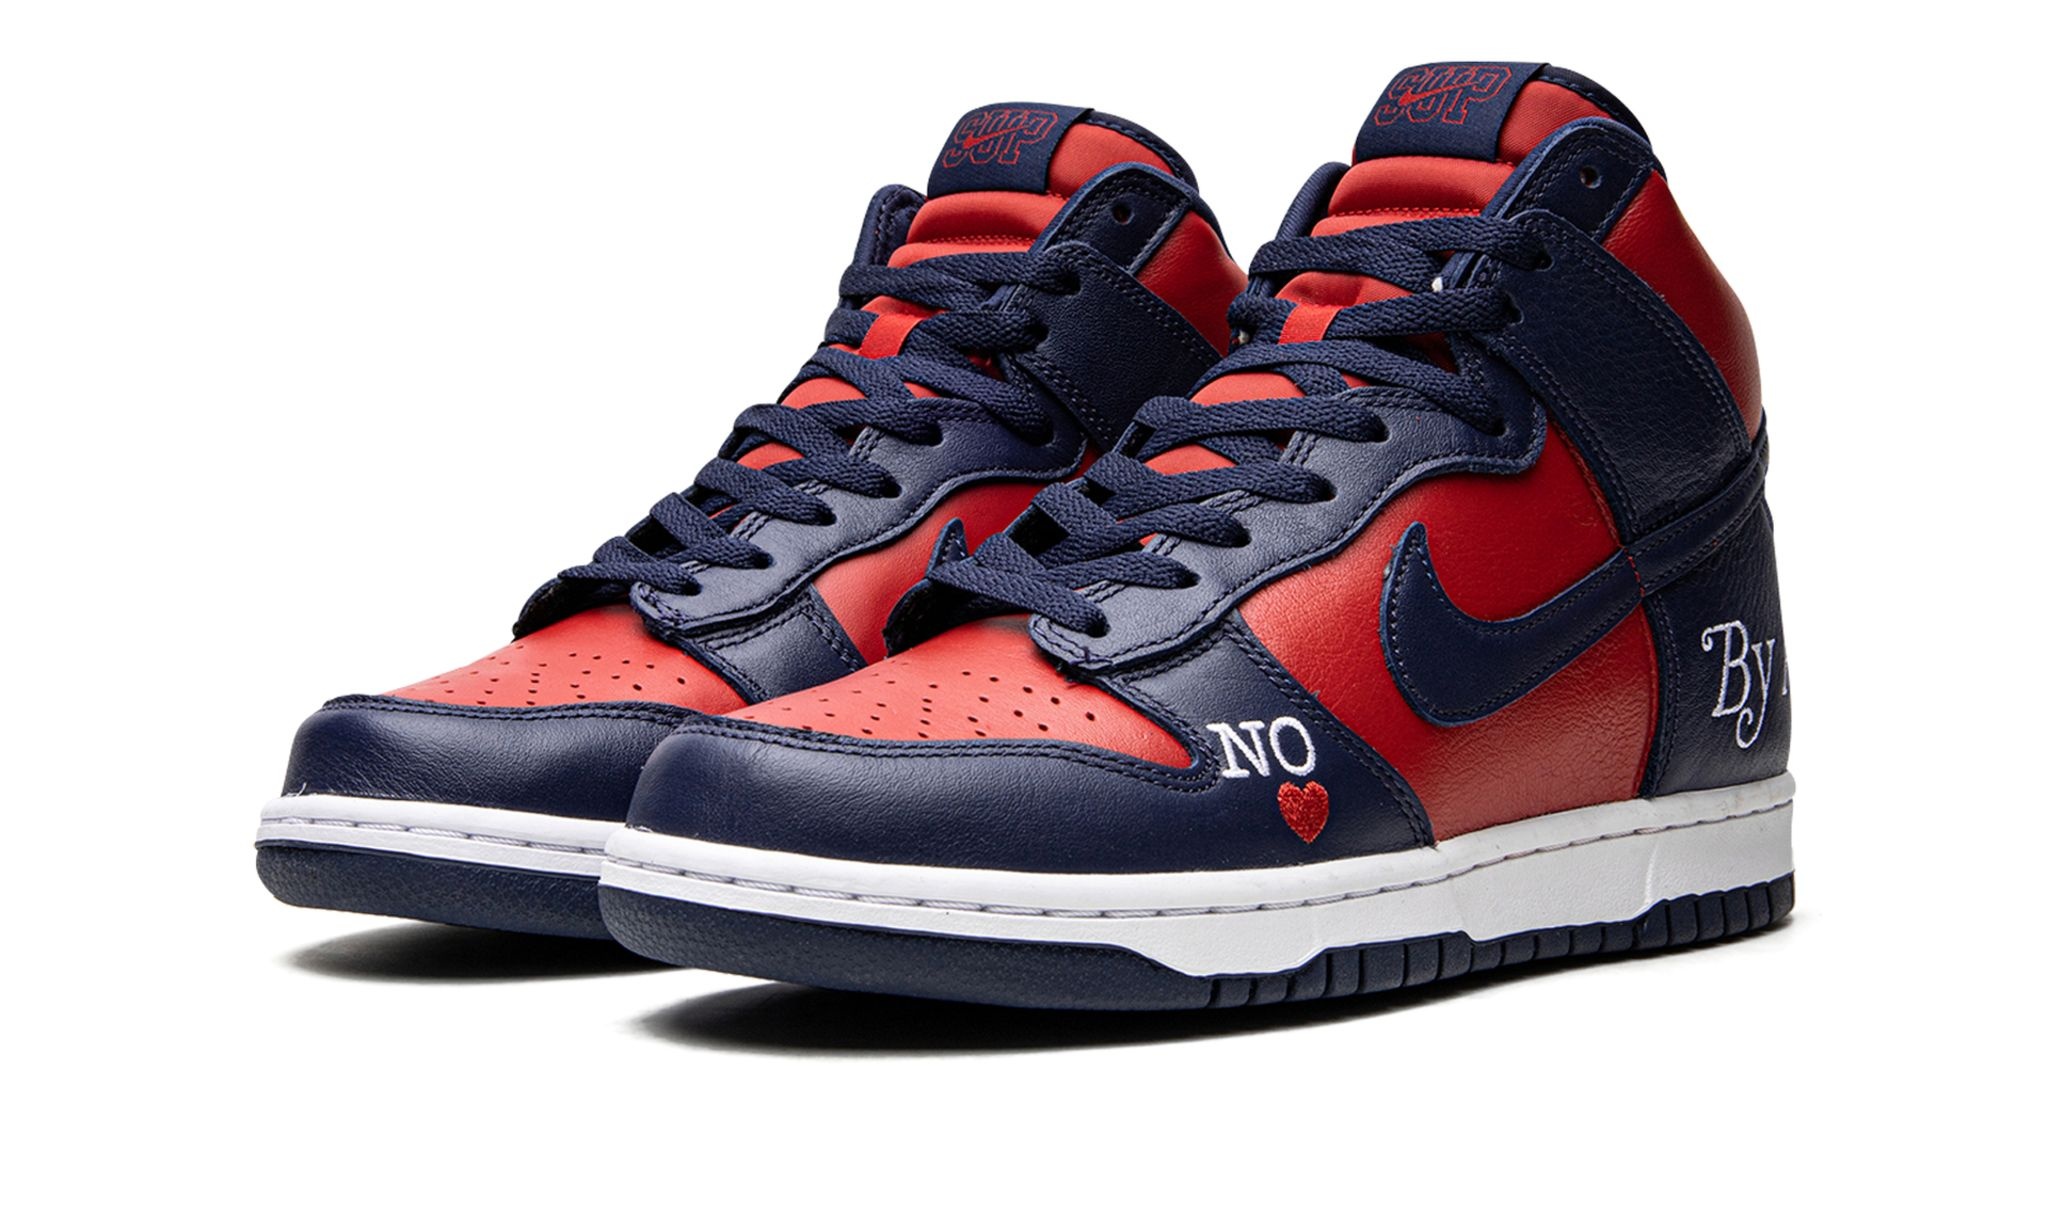 SB Dunk High "Supreme - By Any Means - Navy/Red" - 2